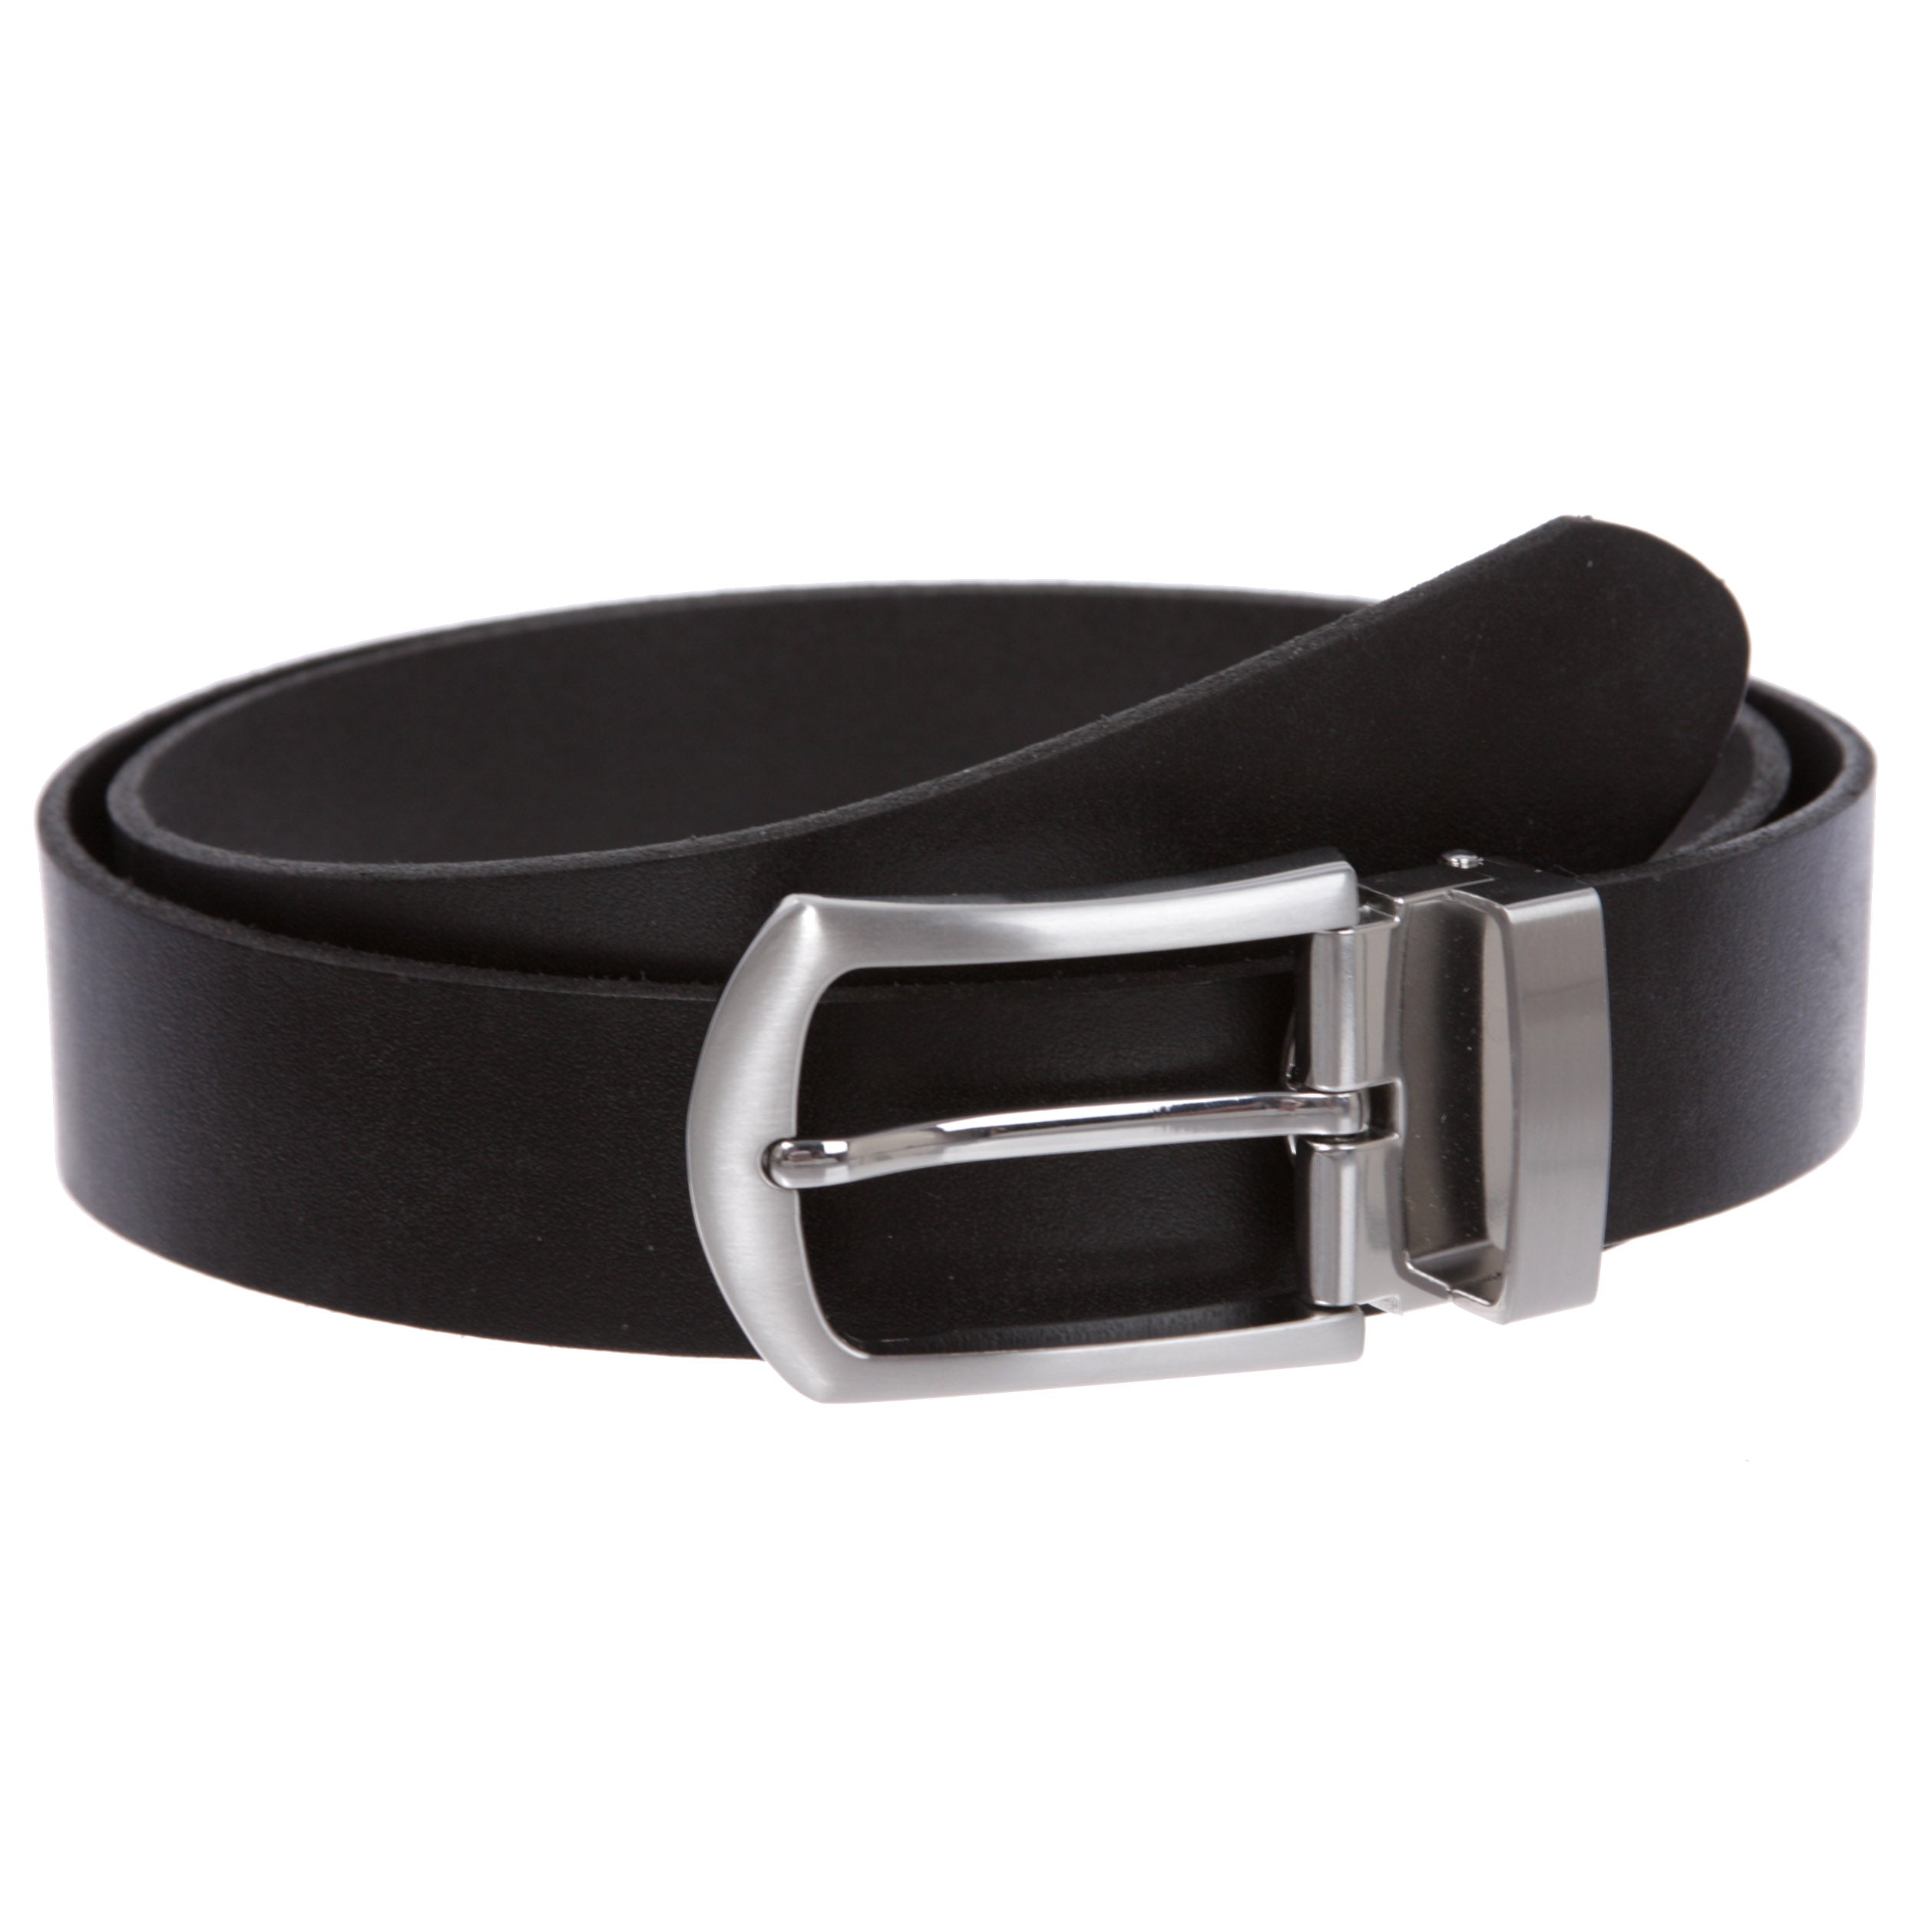 Men's or Women's 1 1/4 Inch (33 mm) Clamp On Nickel Free Cut-to-Fit Leather Belt